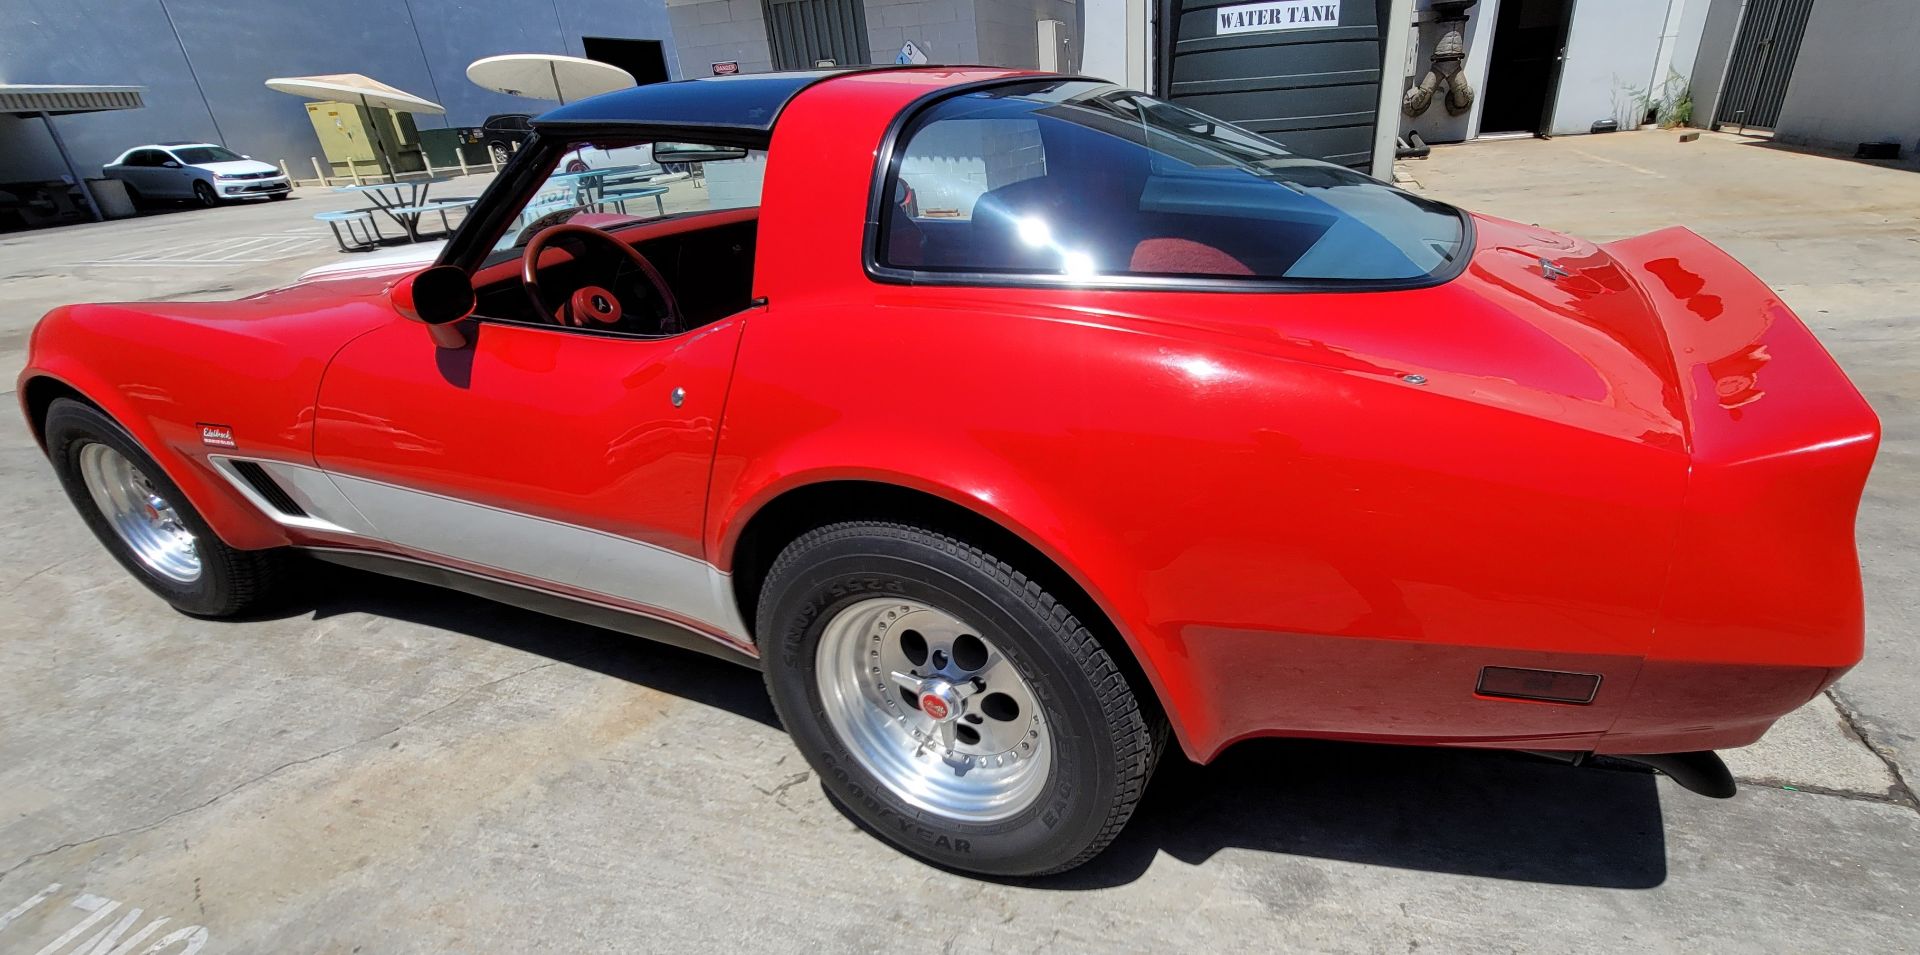 1980 CHEVROLET CORVETTE, WAS VIC EDELBROCK'S PERSONAL CAR BOUGHT FOR R&D, RED INTERIOR, TITLE ONLY. - Image 38 of 70